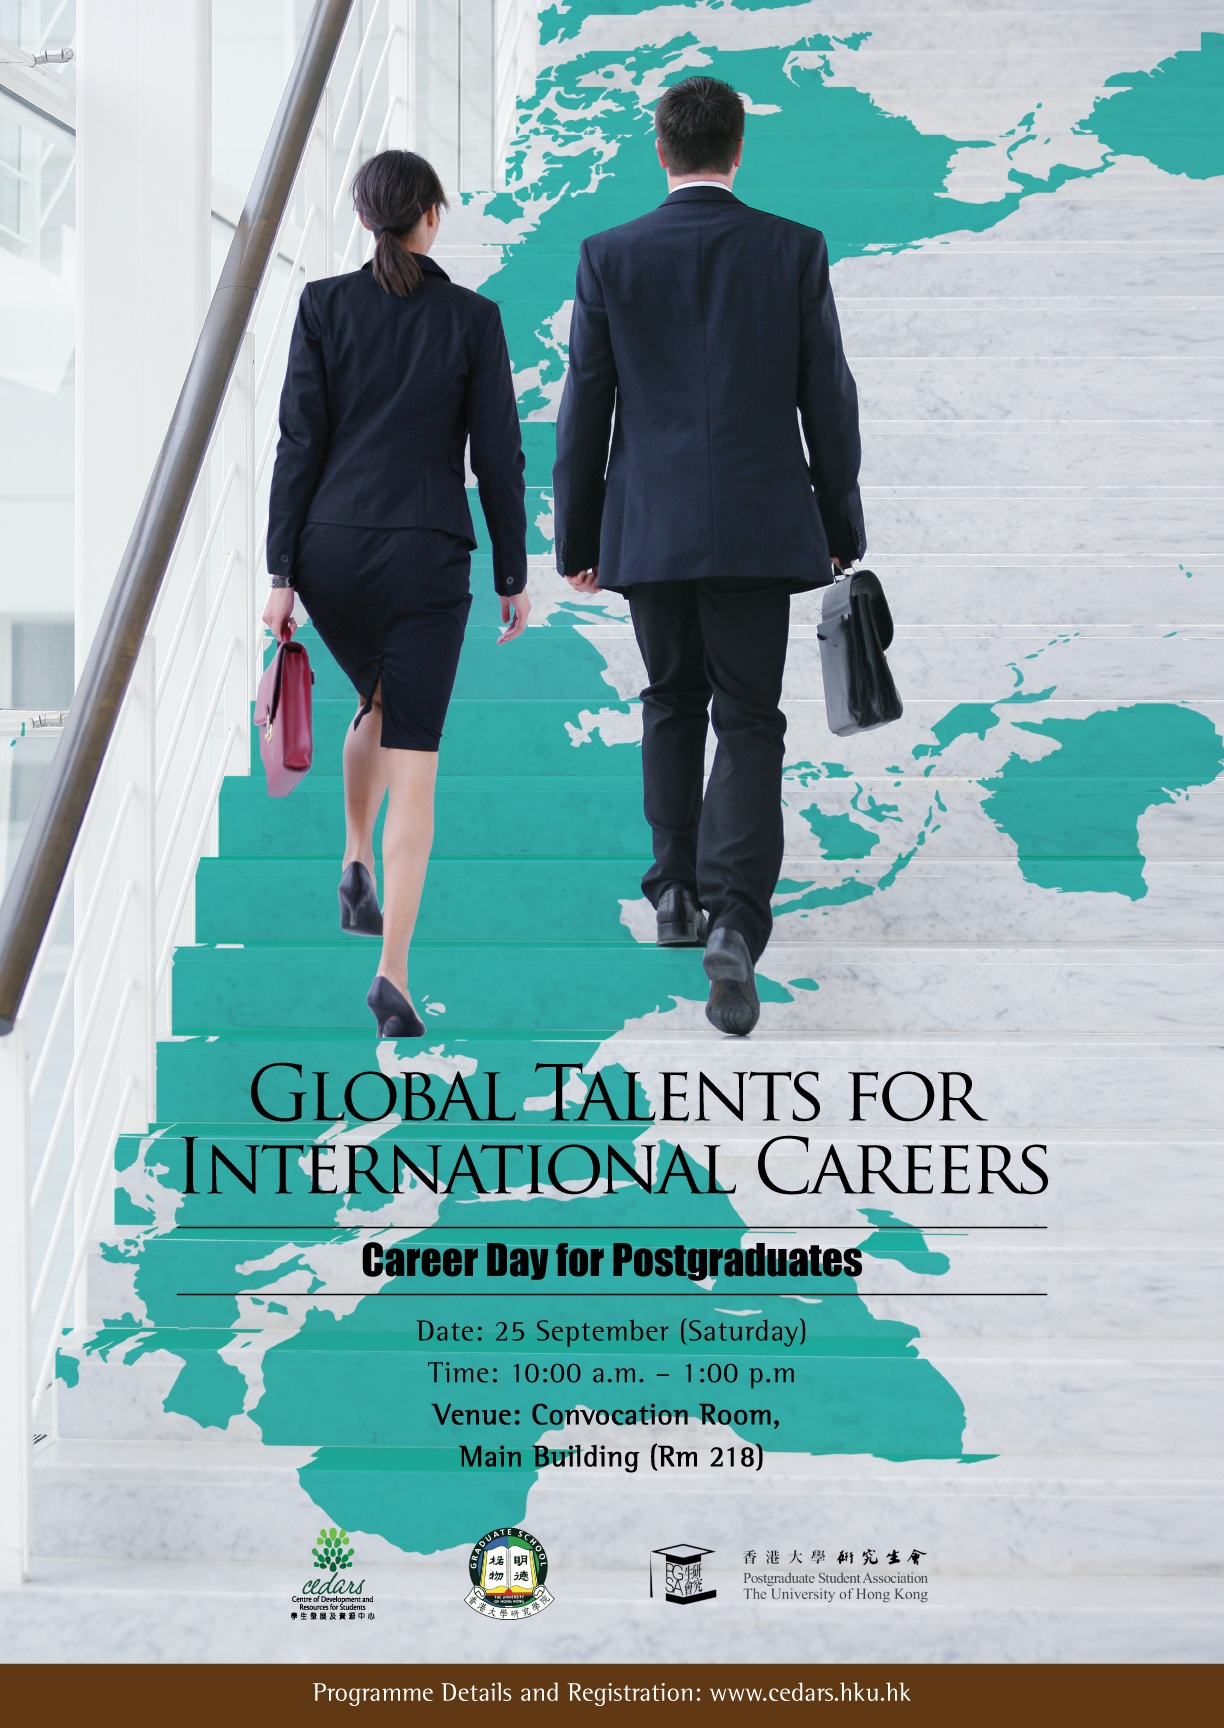 Global Talents for International Careers – Career Day for Postgraduates